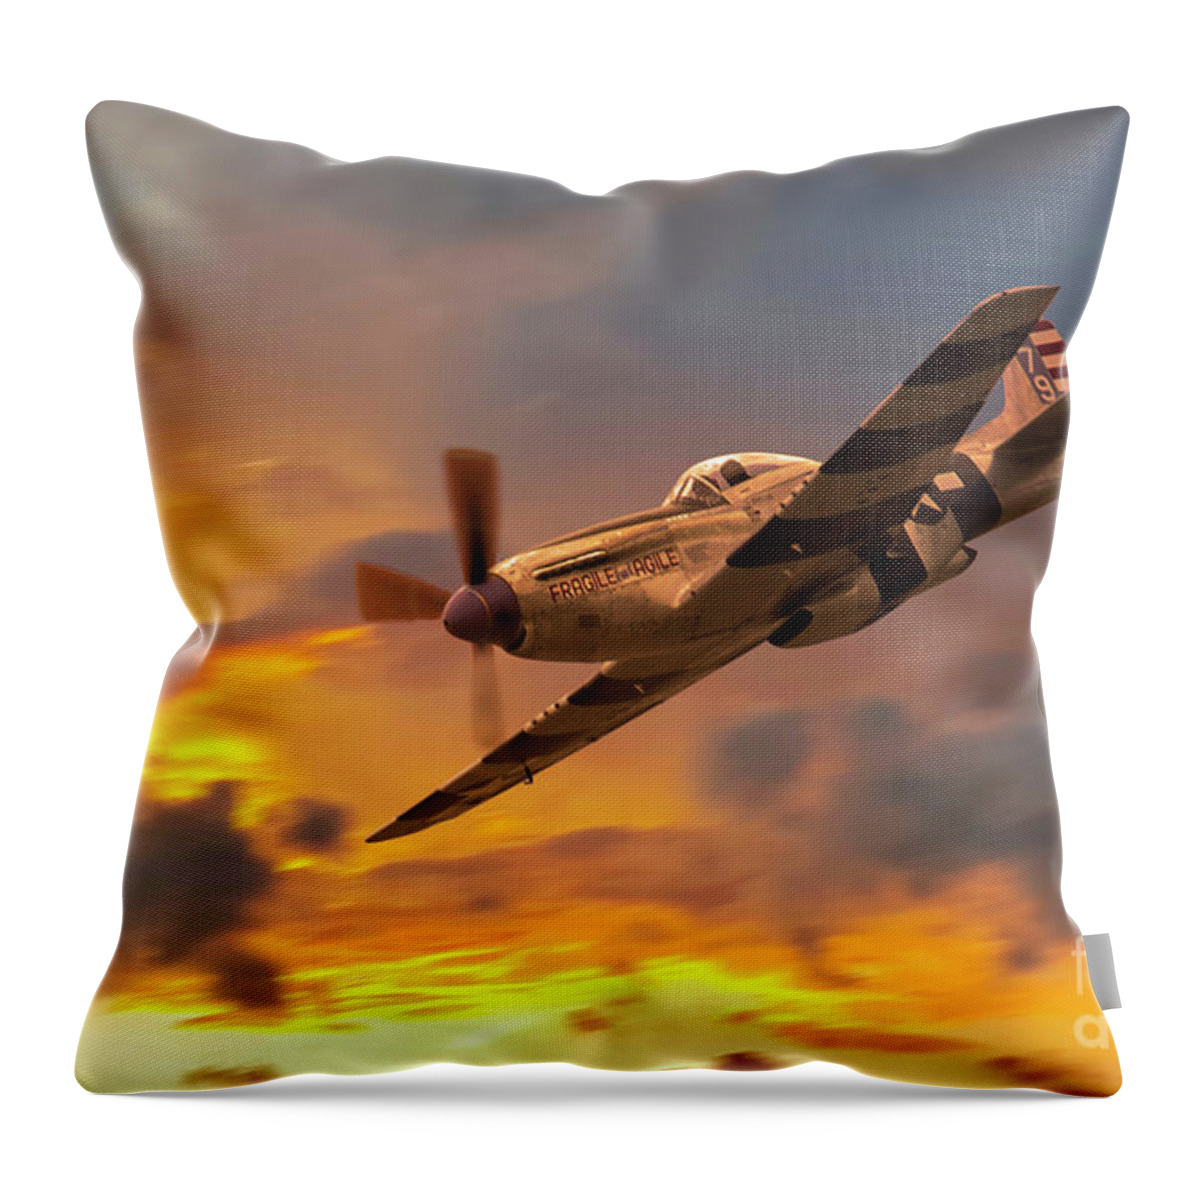 P-51 Mustang Throw Pillow featuring the digital art P-51 Fragile but Agile by Airpower Art